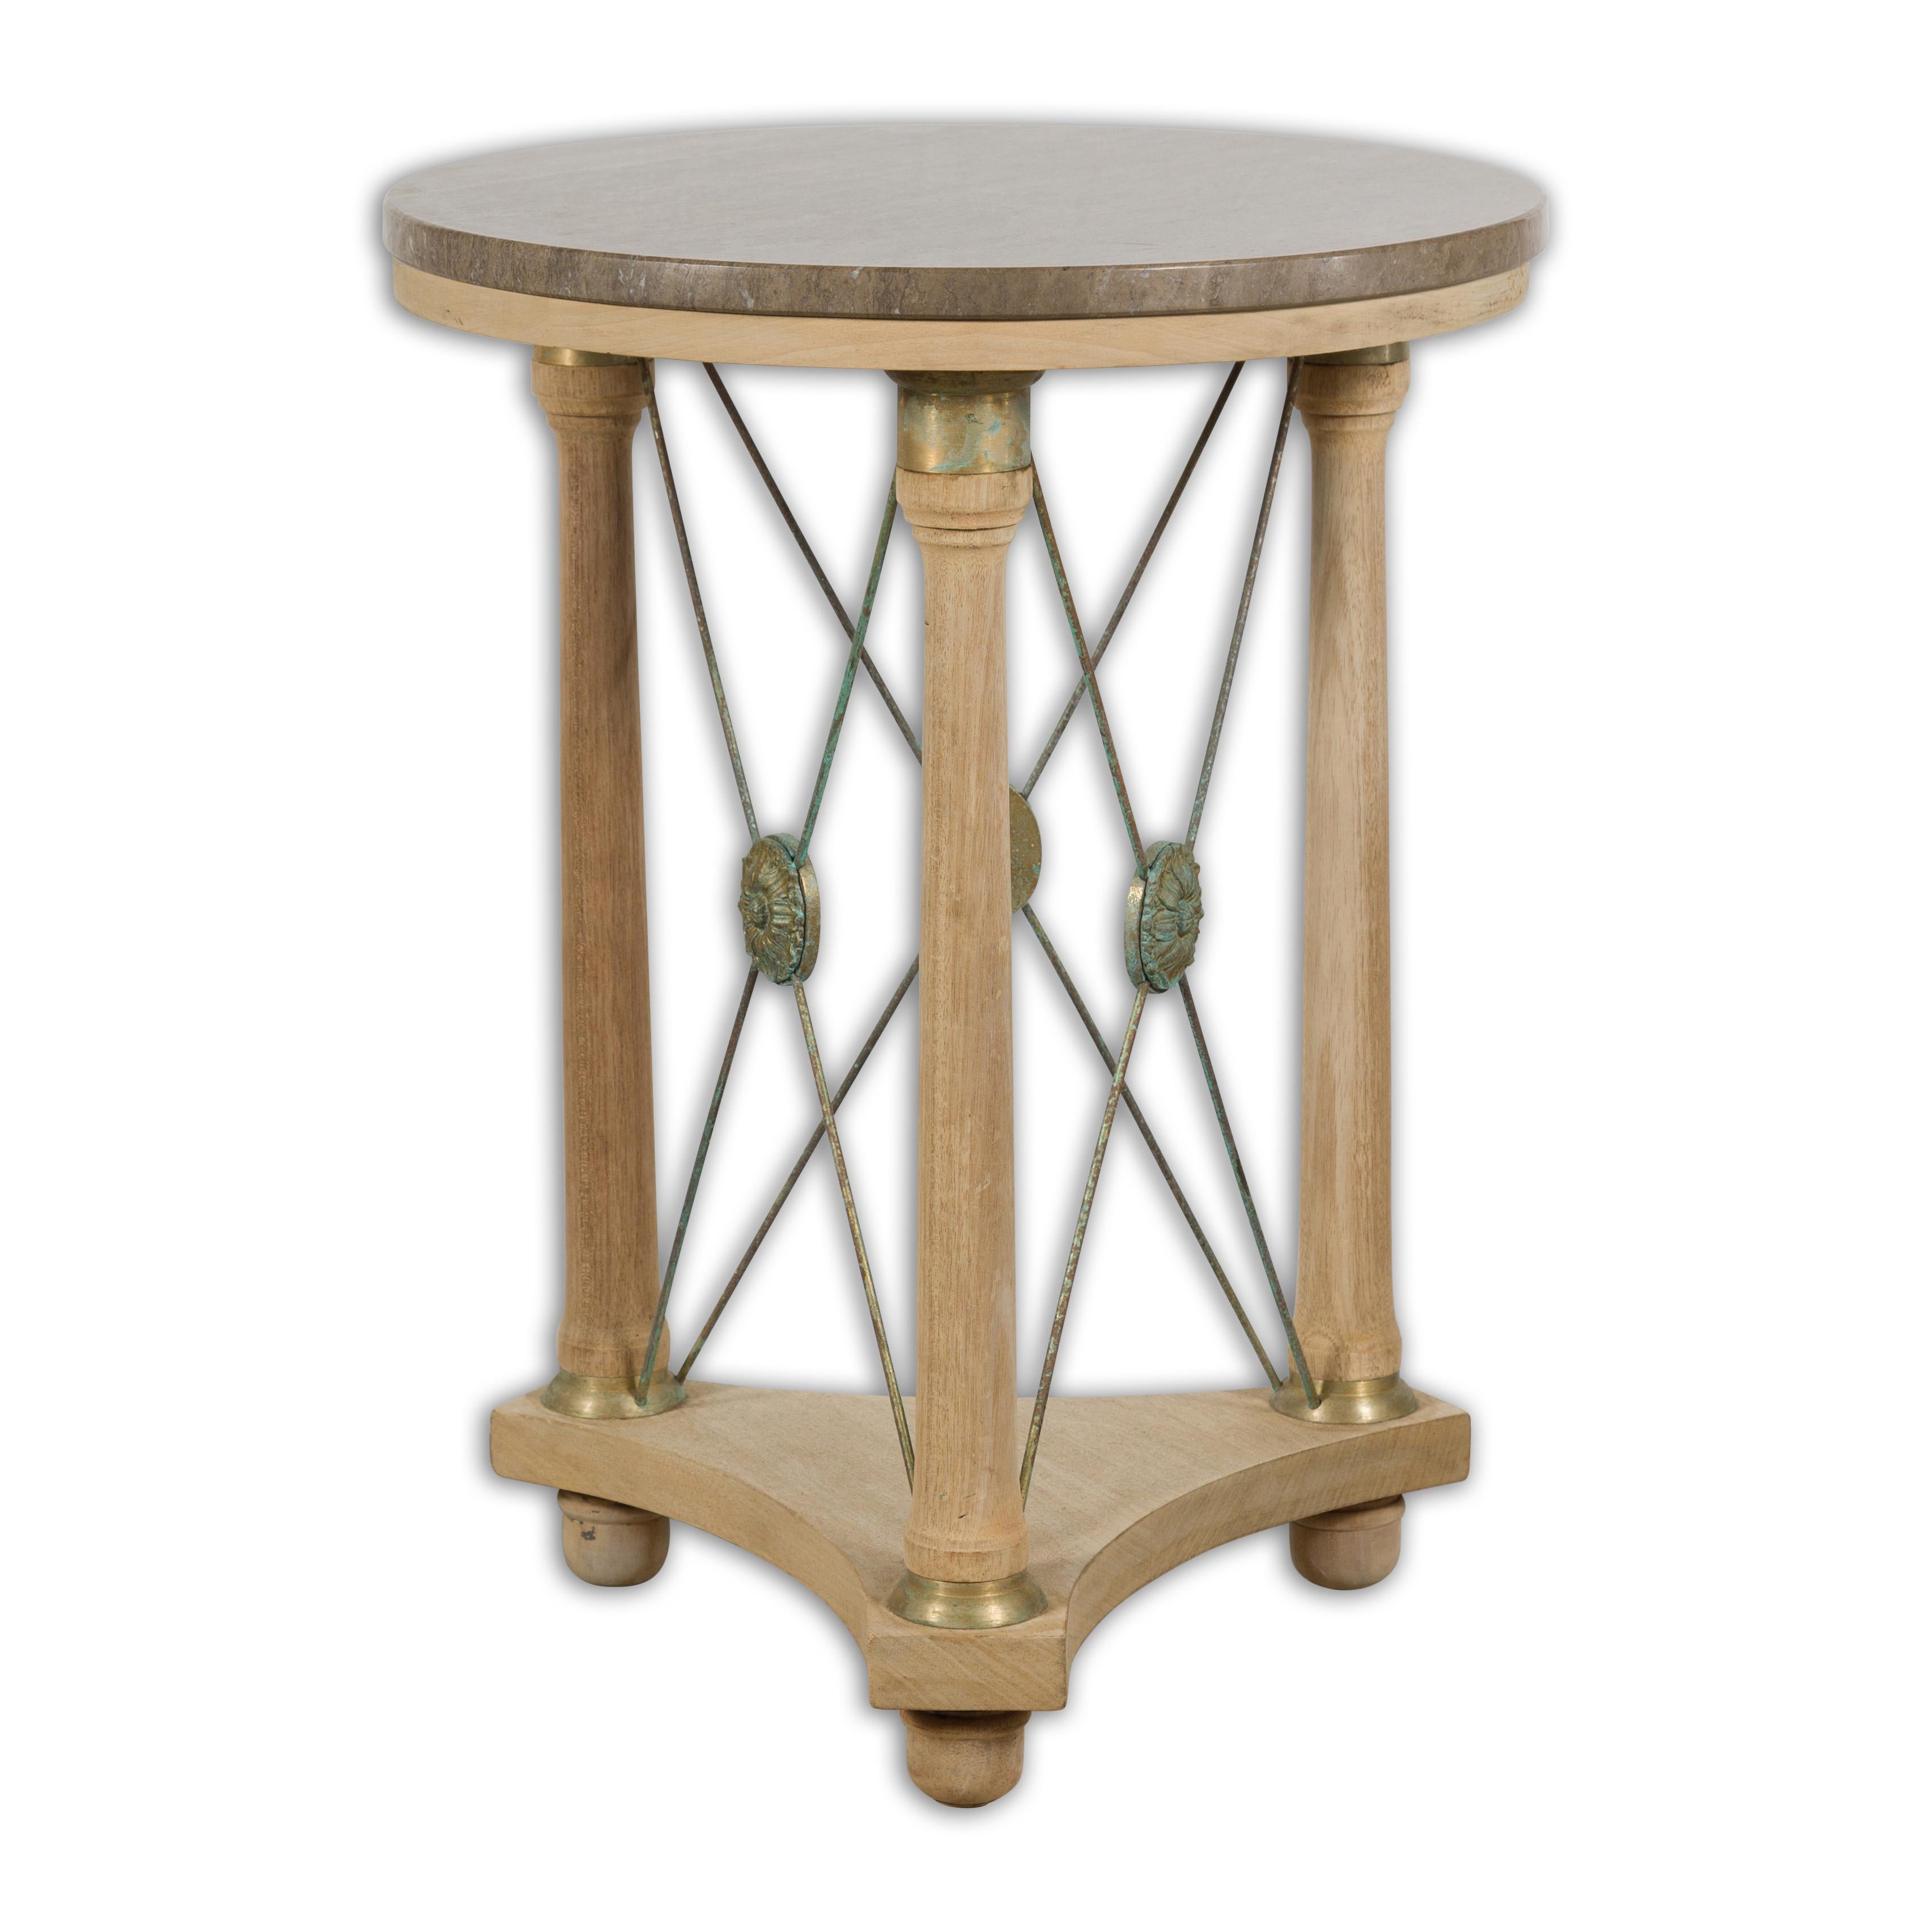 A French Empire style bleached wood side table from the 20th century with round marble top, three columns legs and bronze medallions. Elegant and timeless, this French Empire style bleached wood side table from the 20th century features a round